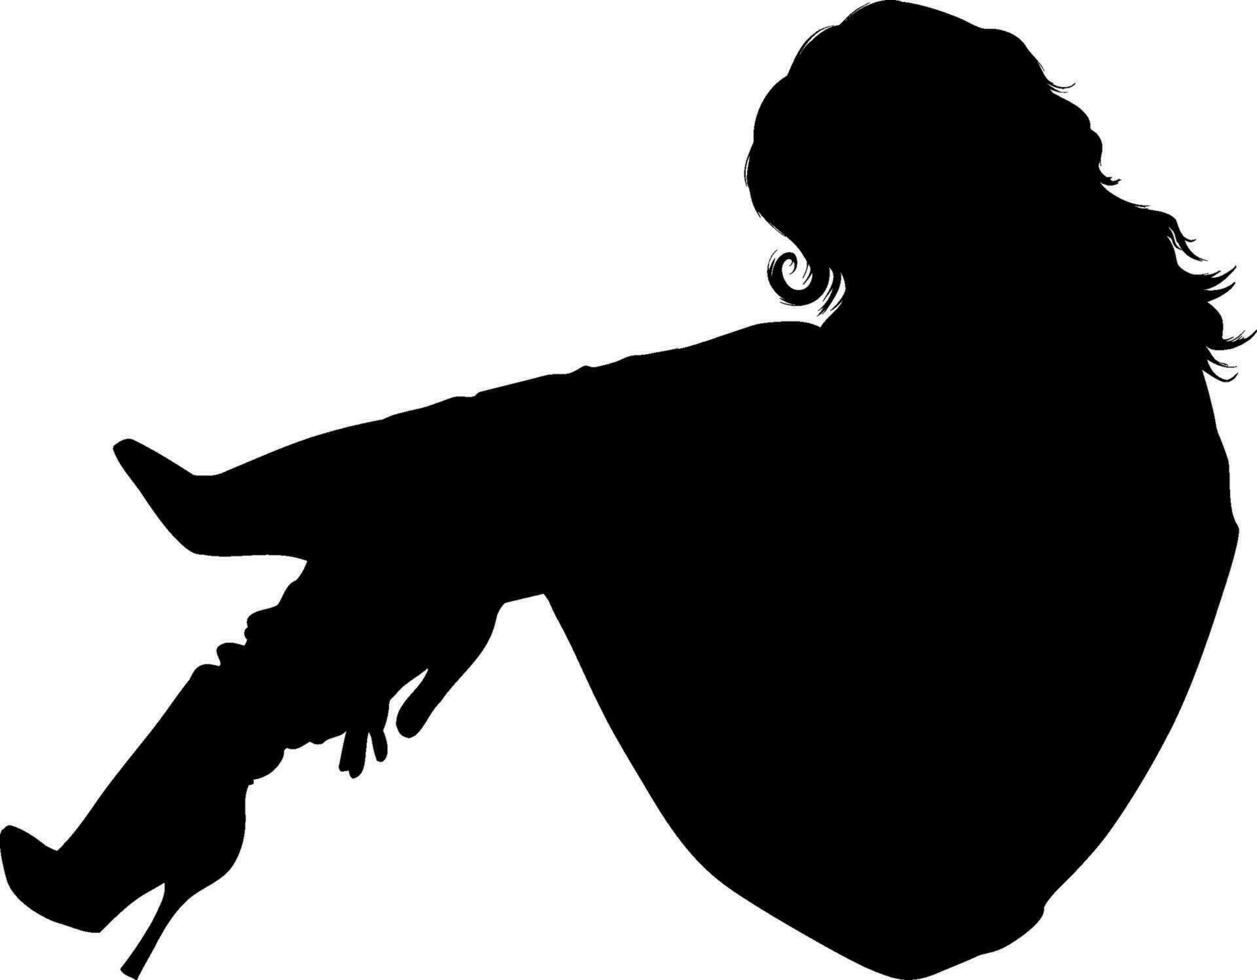 Woman silhouette isolated over white background. Sitting lady figure vector illustration